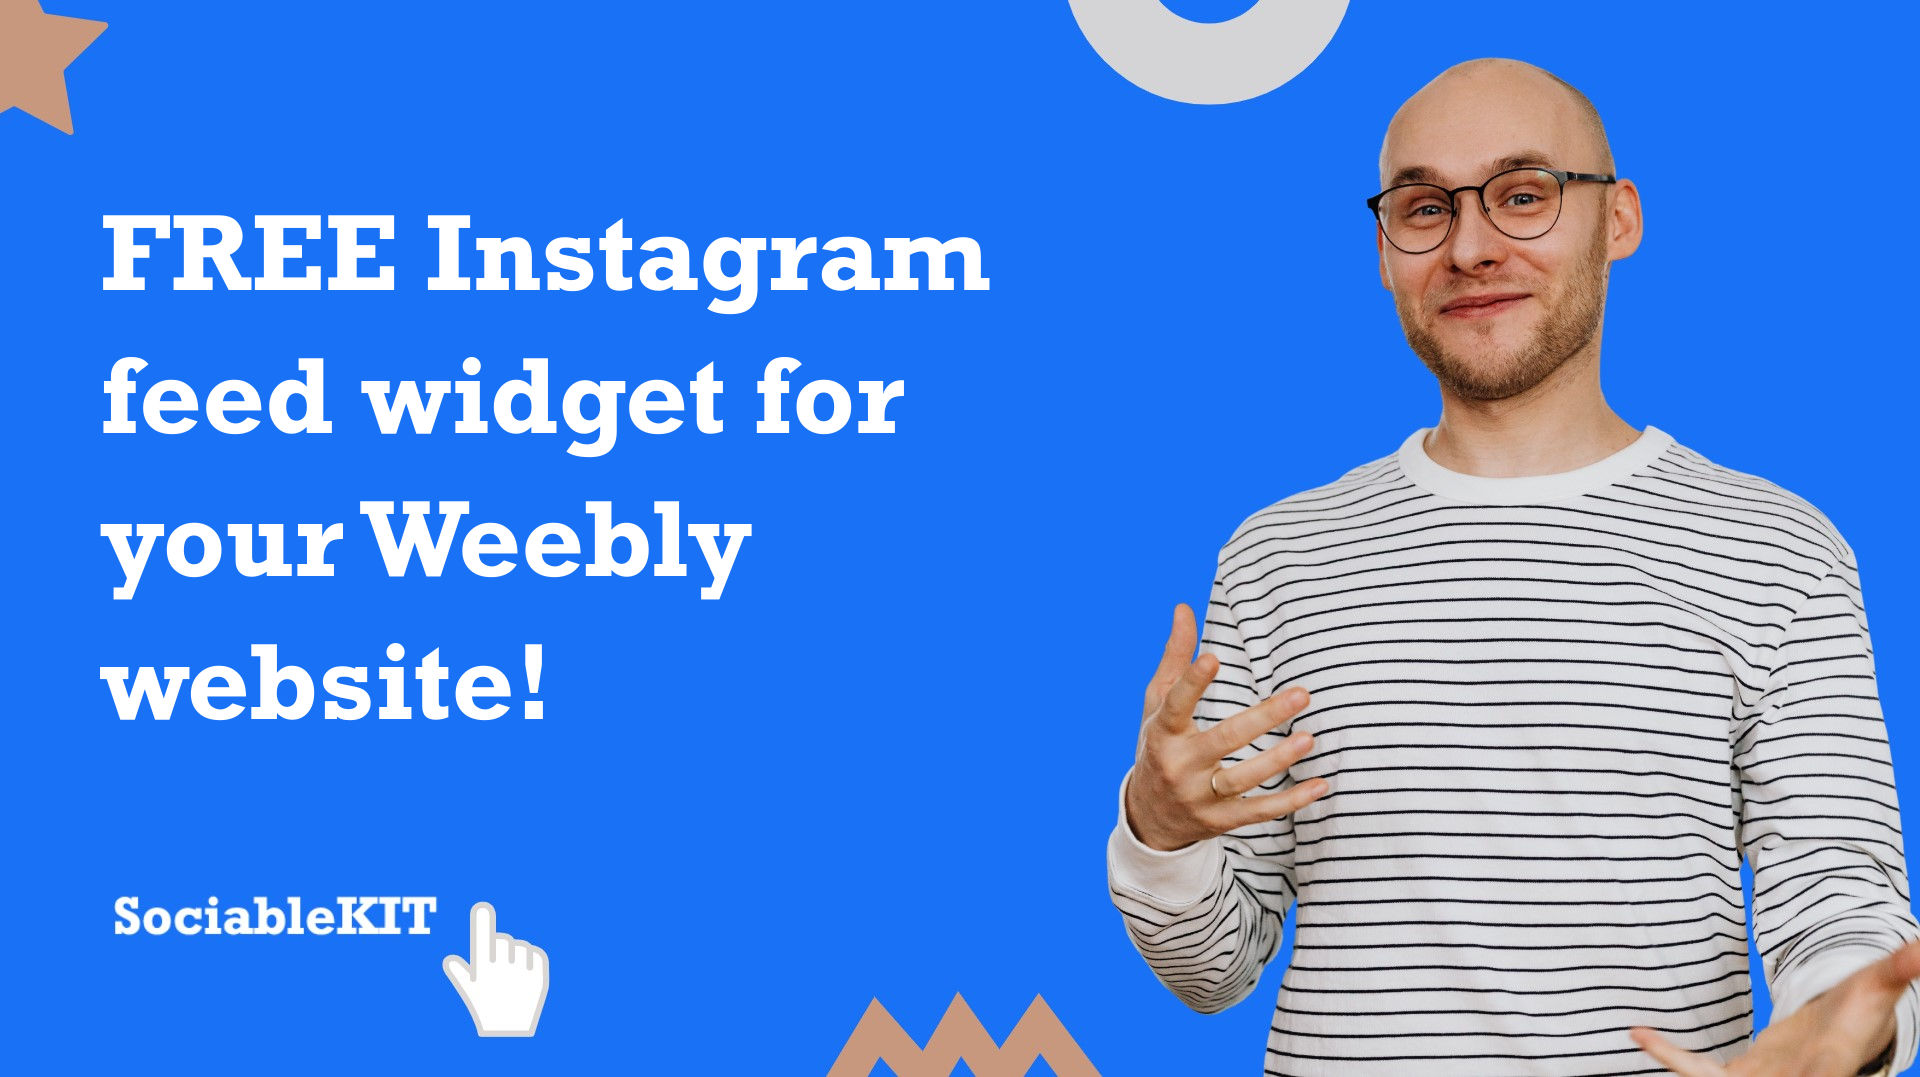 Free Instagram feed widget for your Weebly website